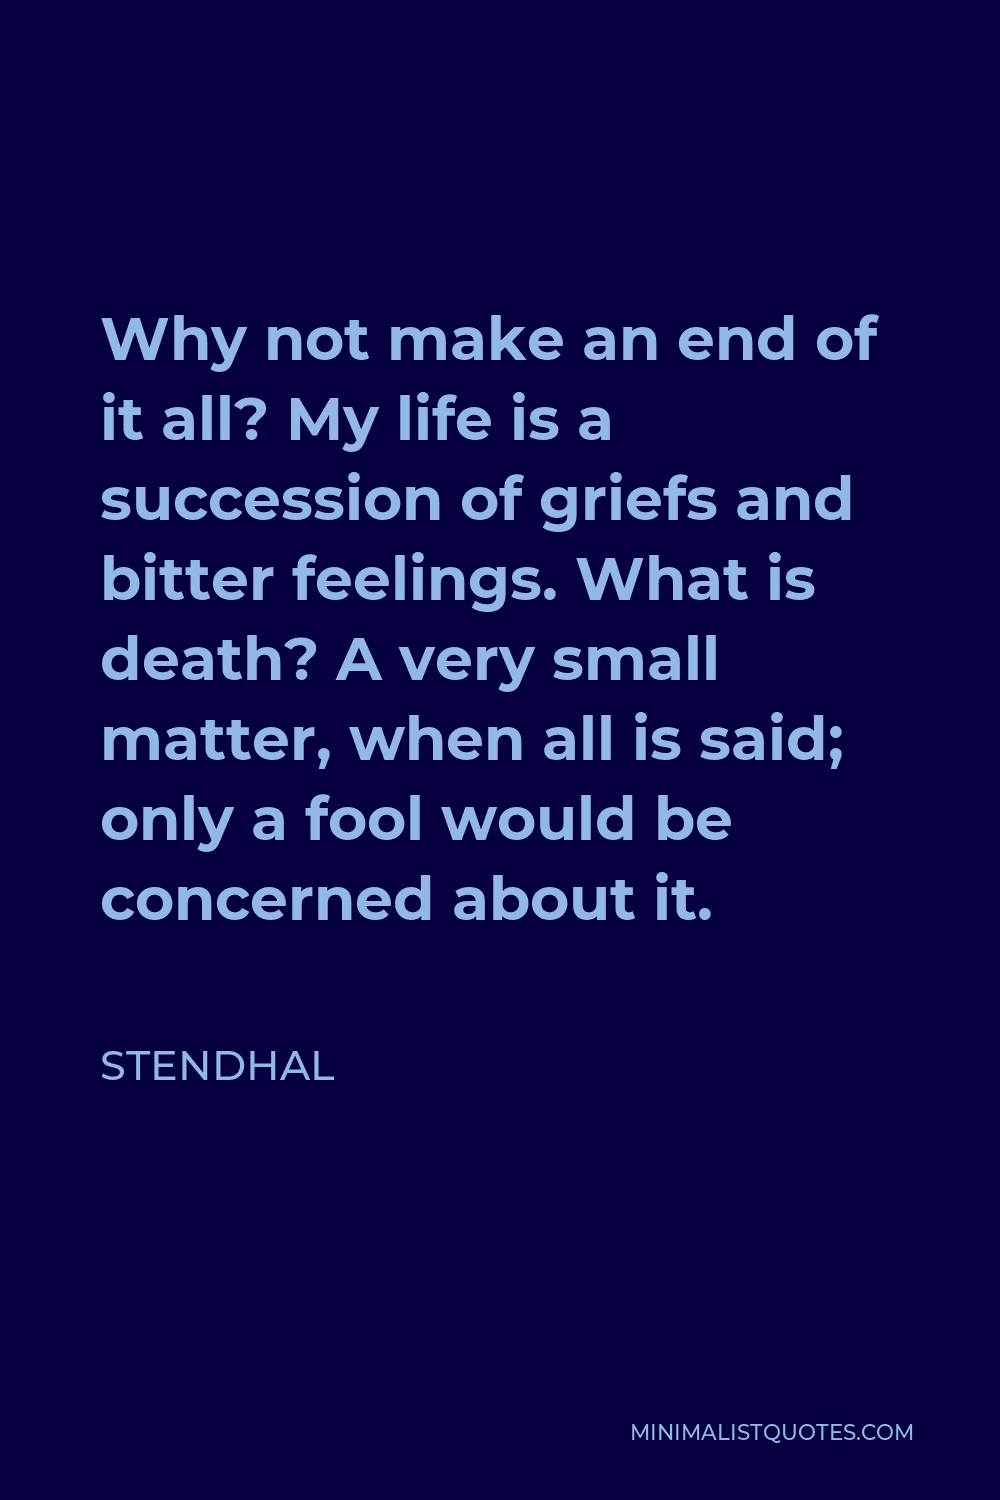 Stendhal Quote - Why not make an end of it all? My life is a succession of griefs and bitter feelings. What is death? A very small matter, when all is said; only a fool would be concerned about it.